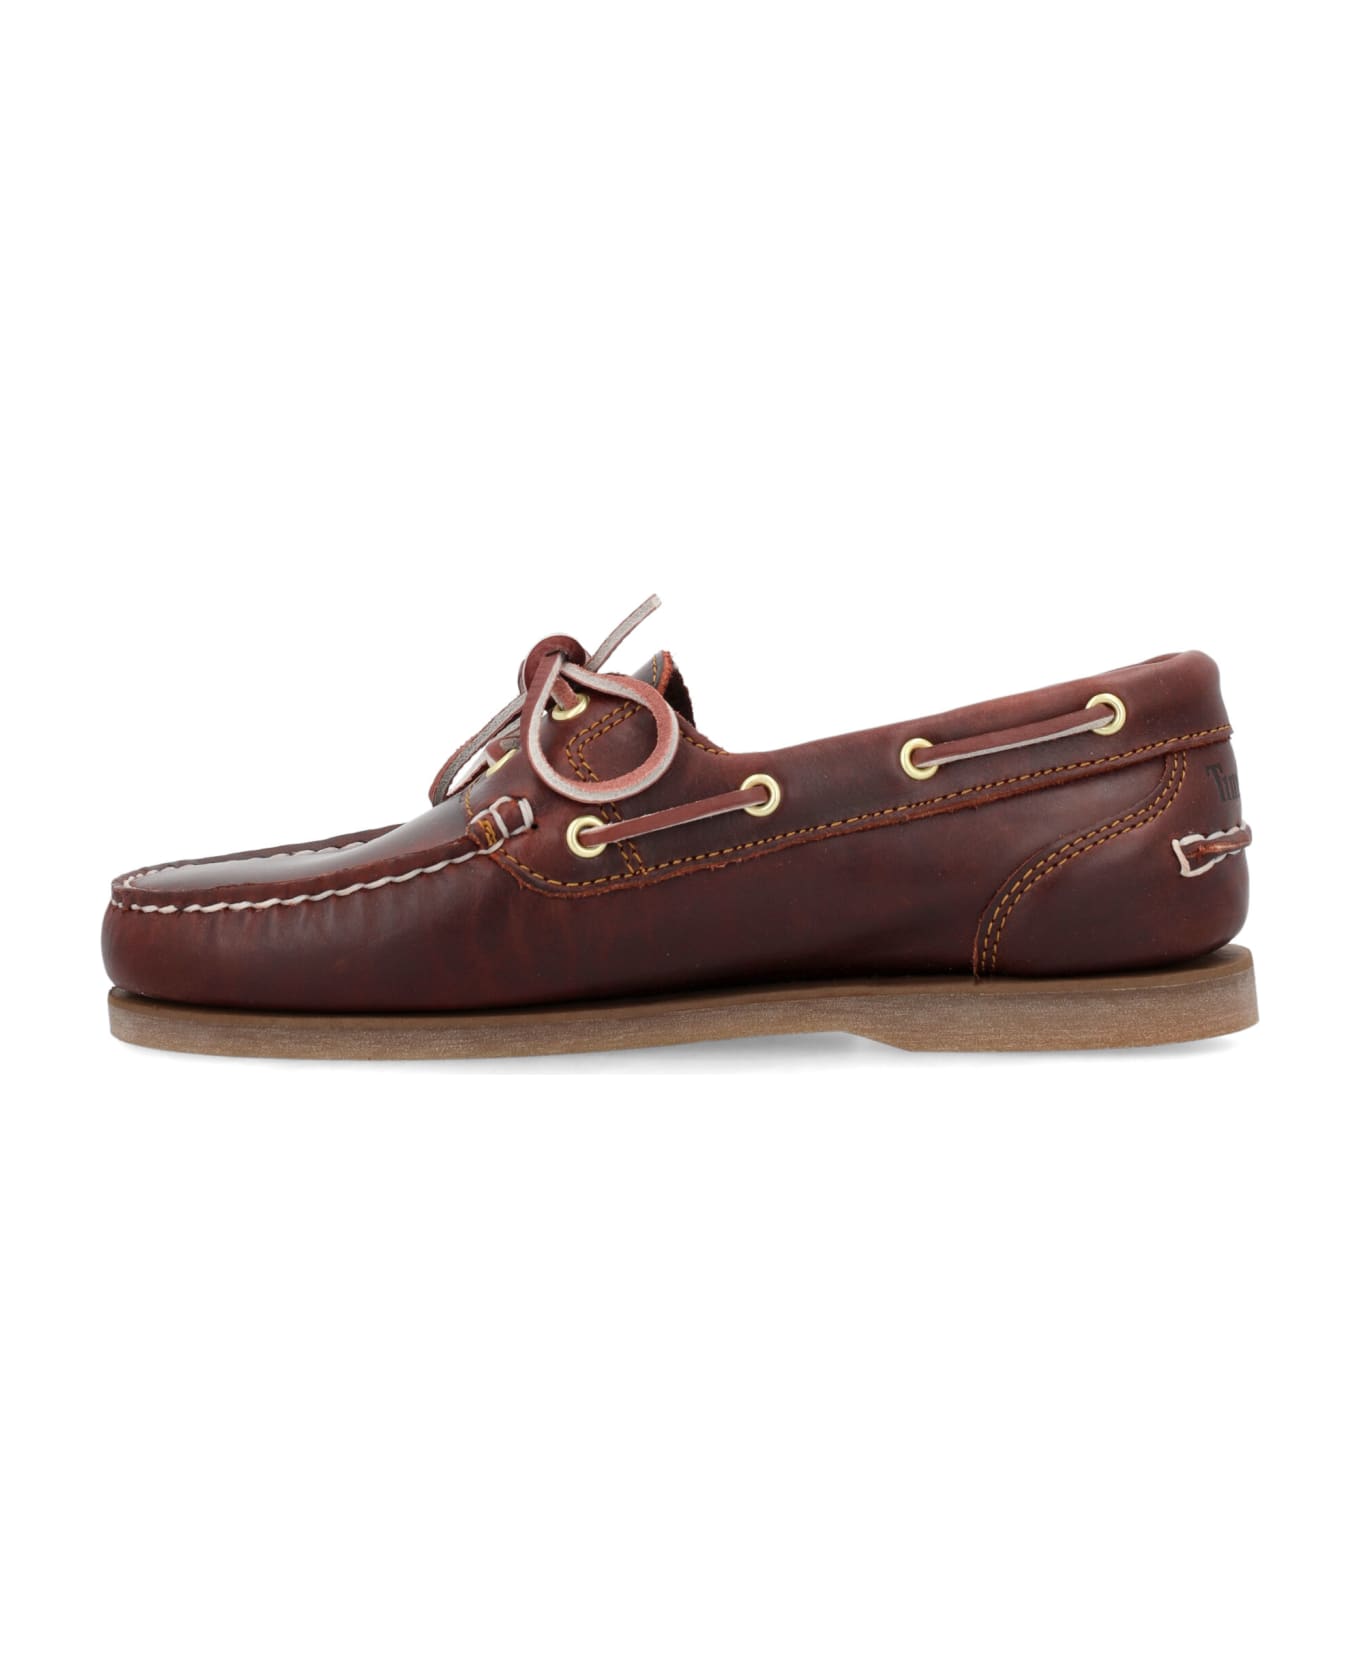 Timberland Classic Boat Shoe - MID BROWN